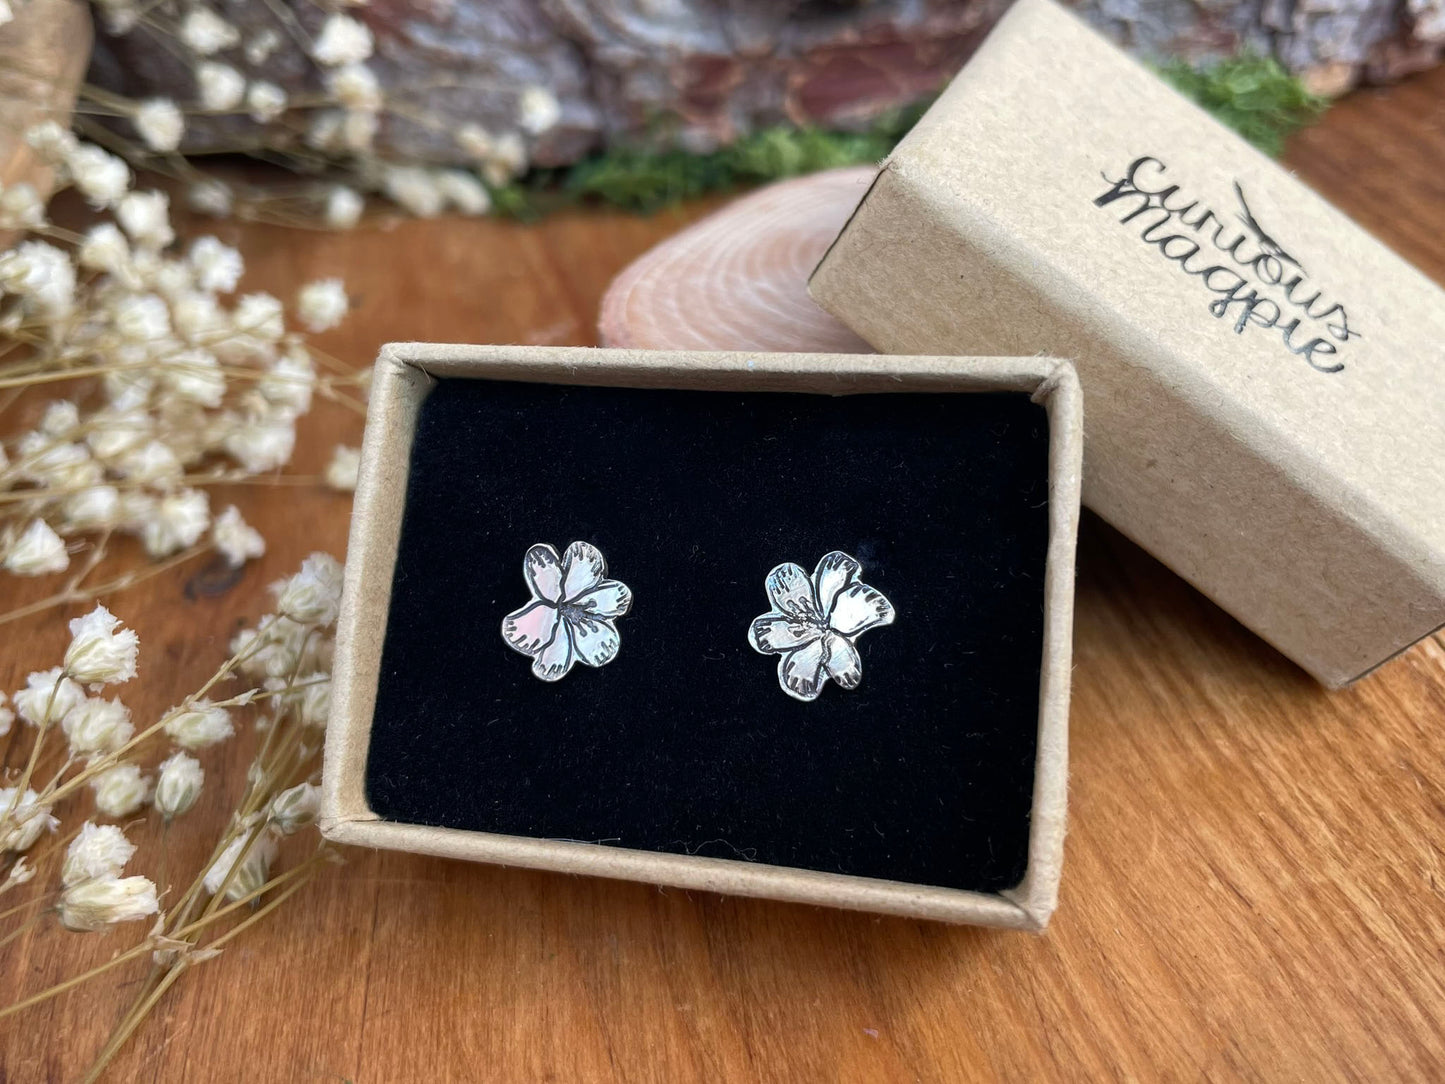 Oxidised Silver Blossom Stud Earrings by Curious Magpie Jewellery